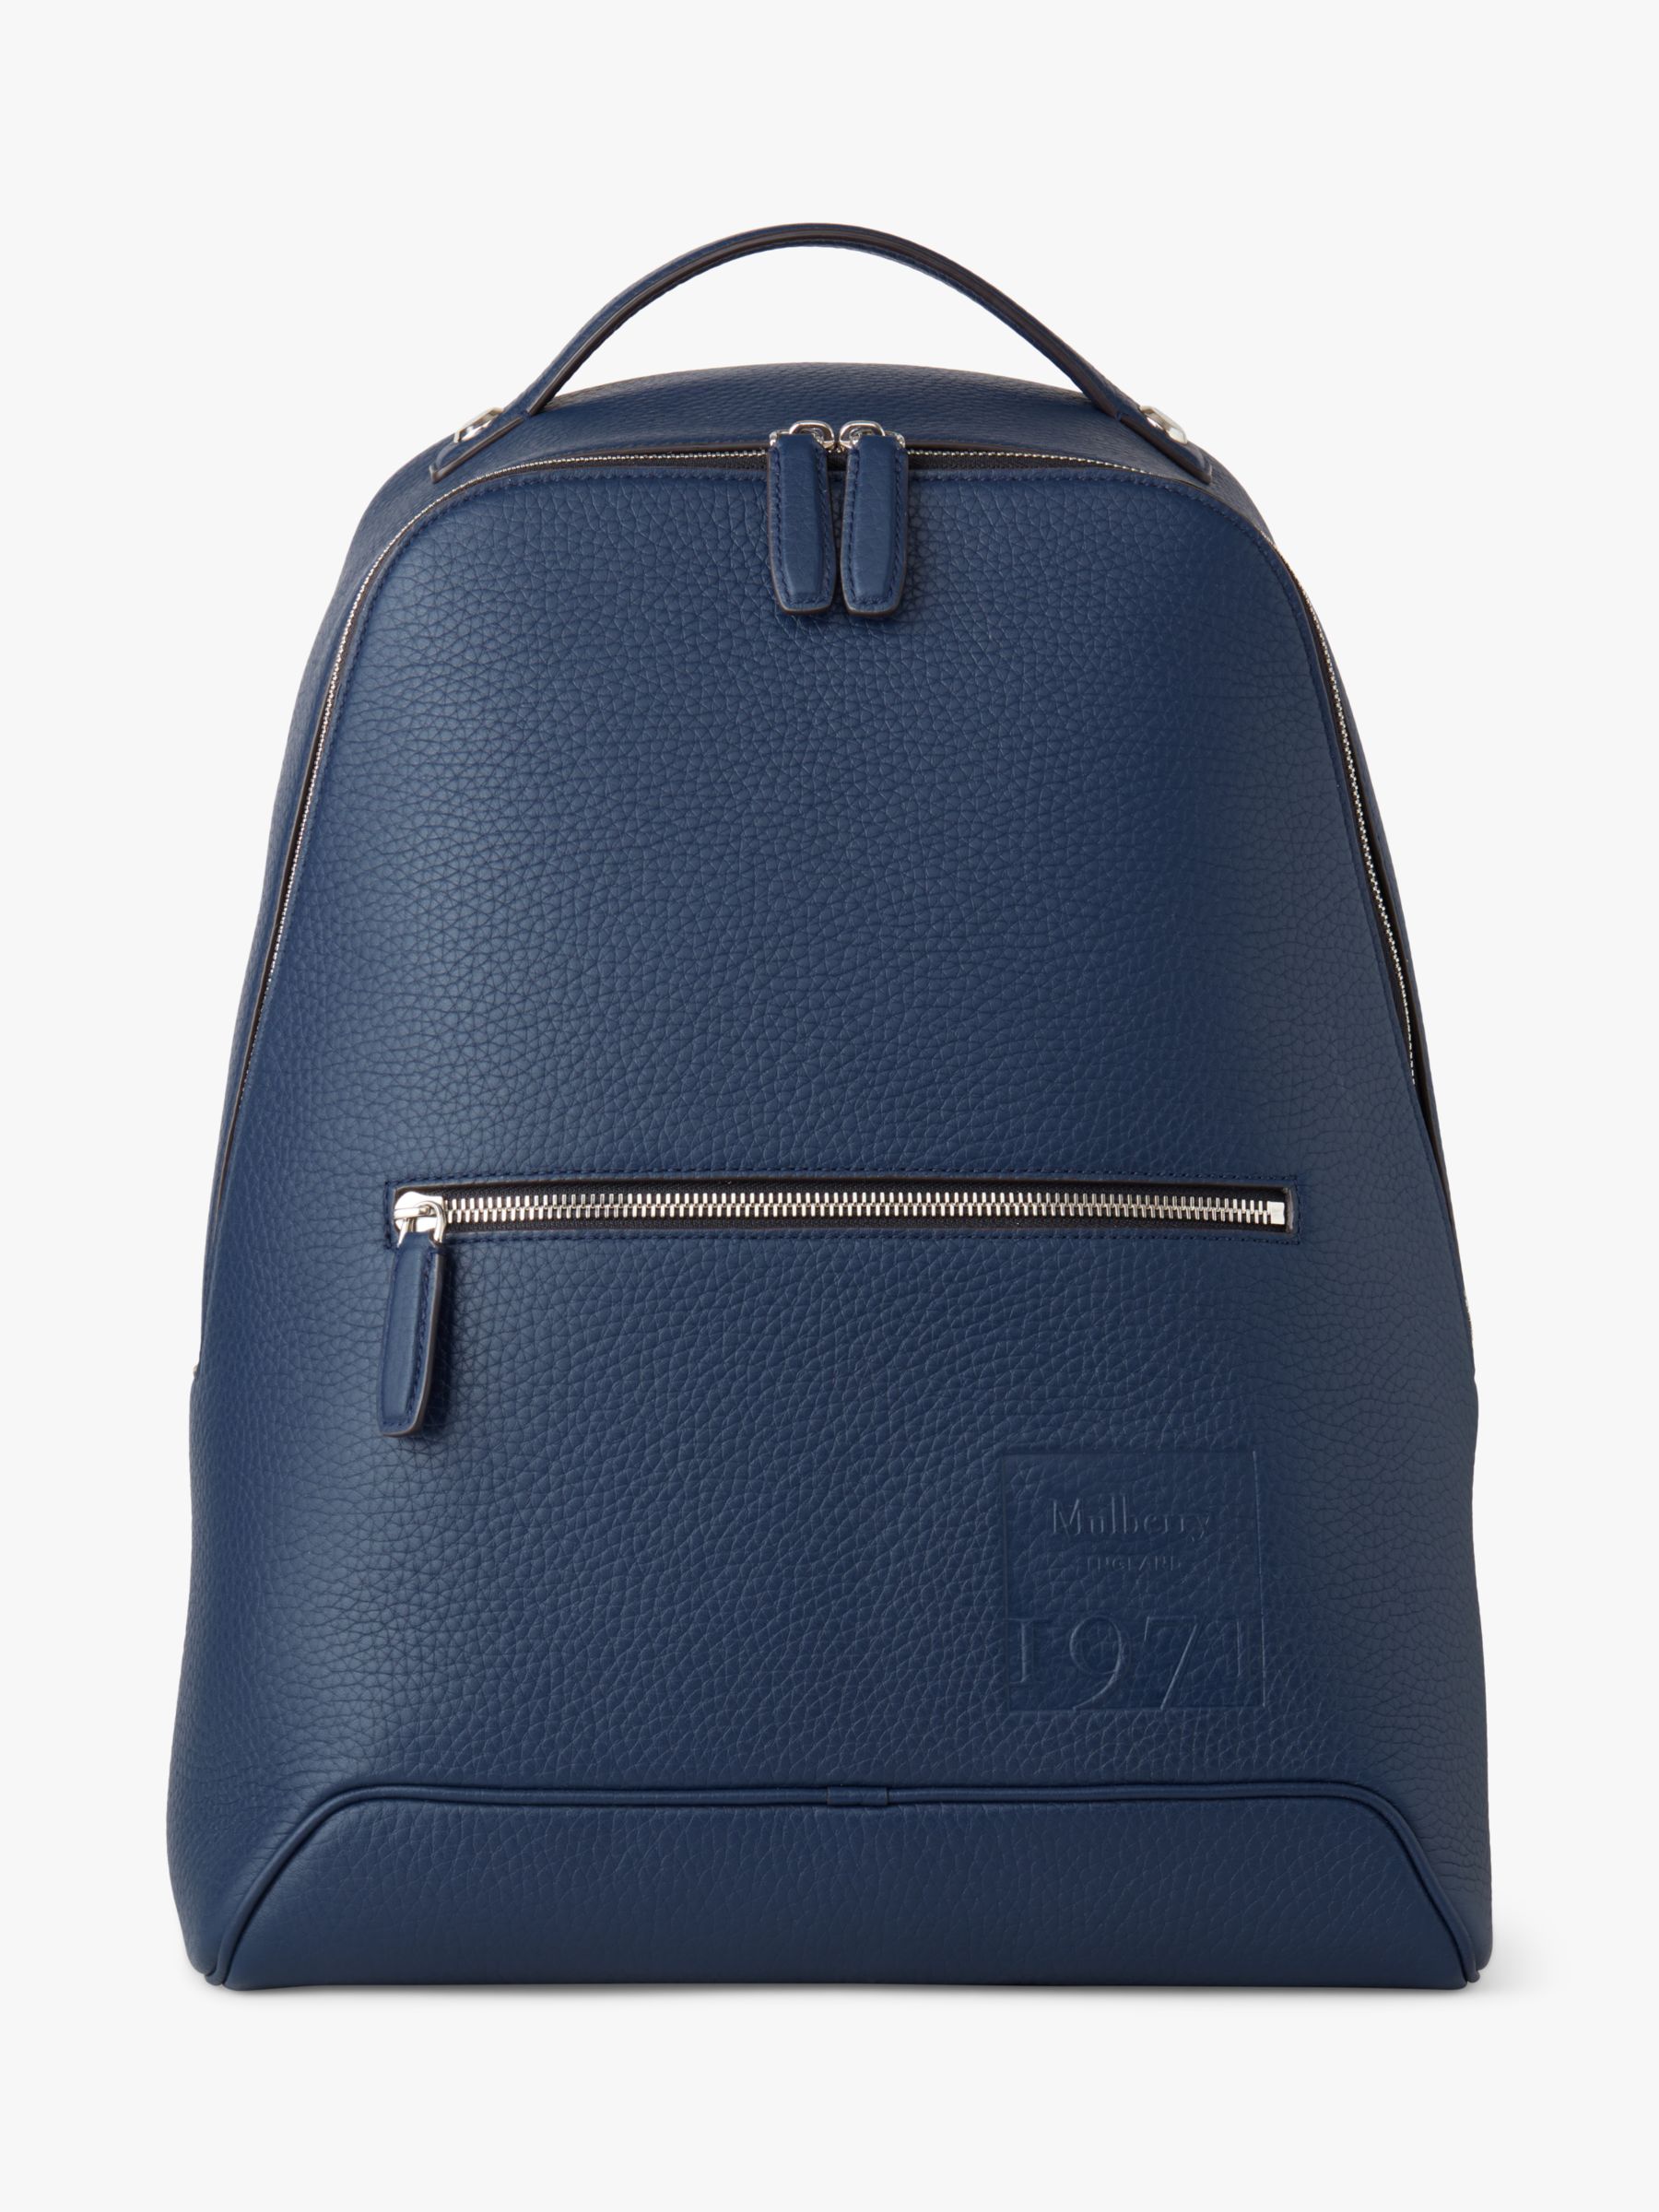 Mulberry City Heavy Grain Backpack, Sapphire